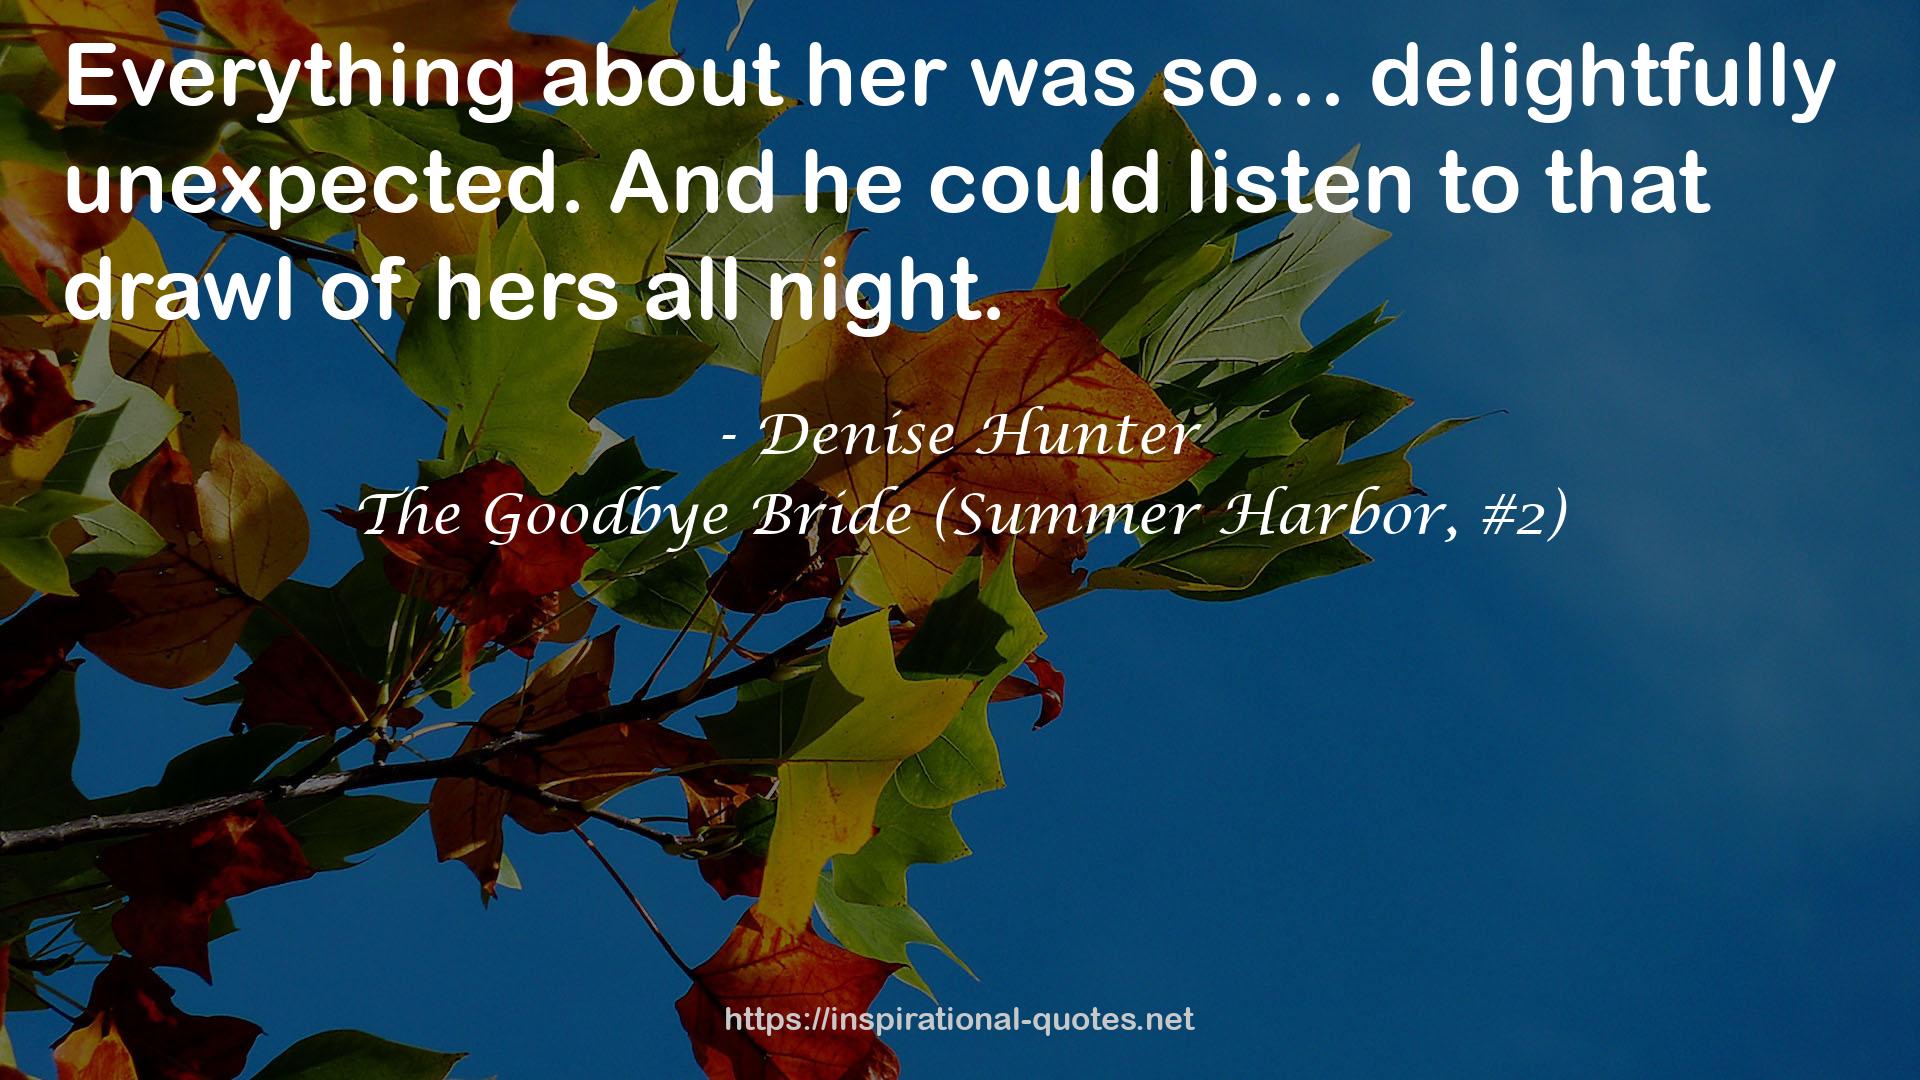 The Goodbye Bride (Summer Harbor, #2) QUOTES